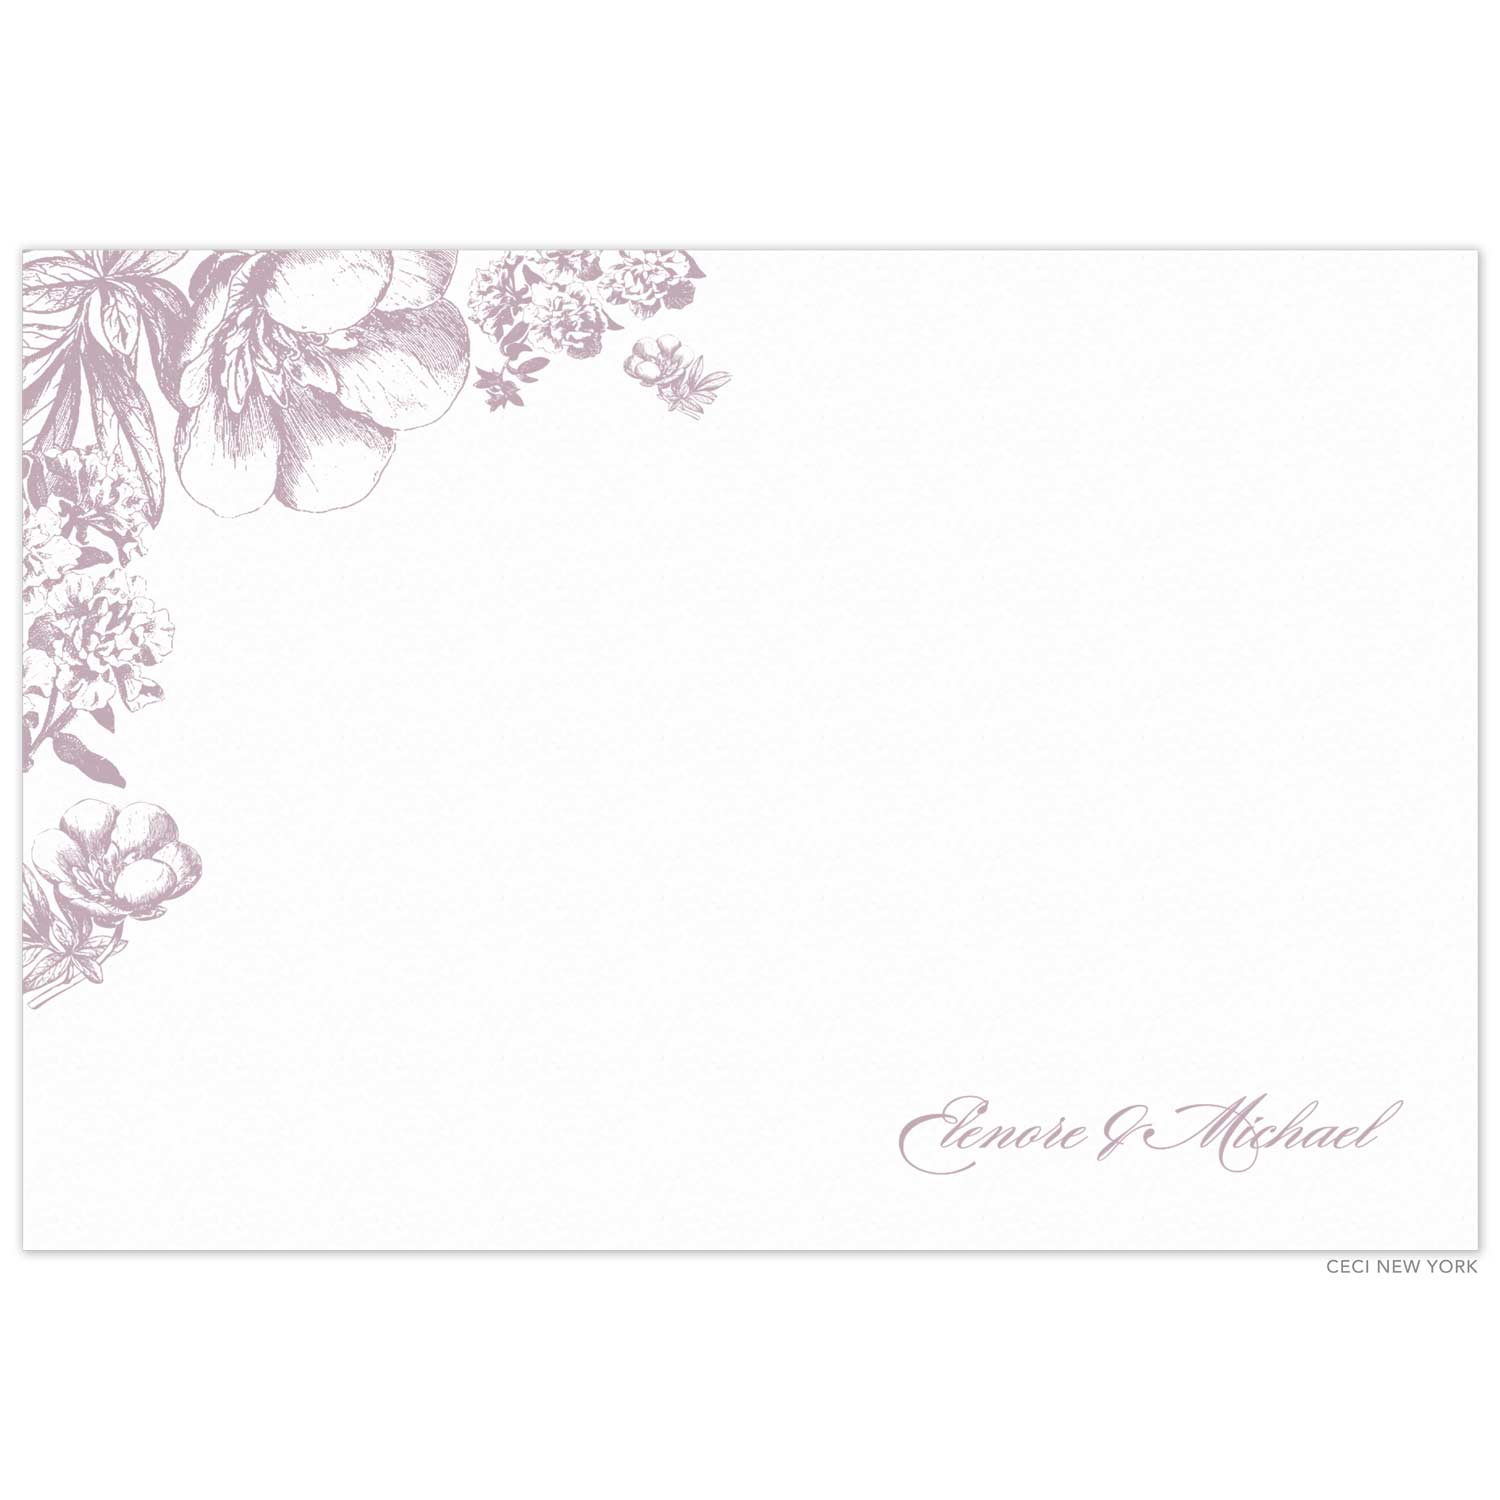 I LOVE YOU! new Authentic CHANEL White gift note Card & Envelope 3 3/4  x 5 1/4